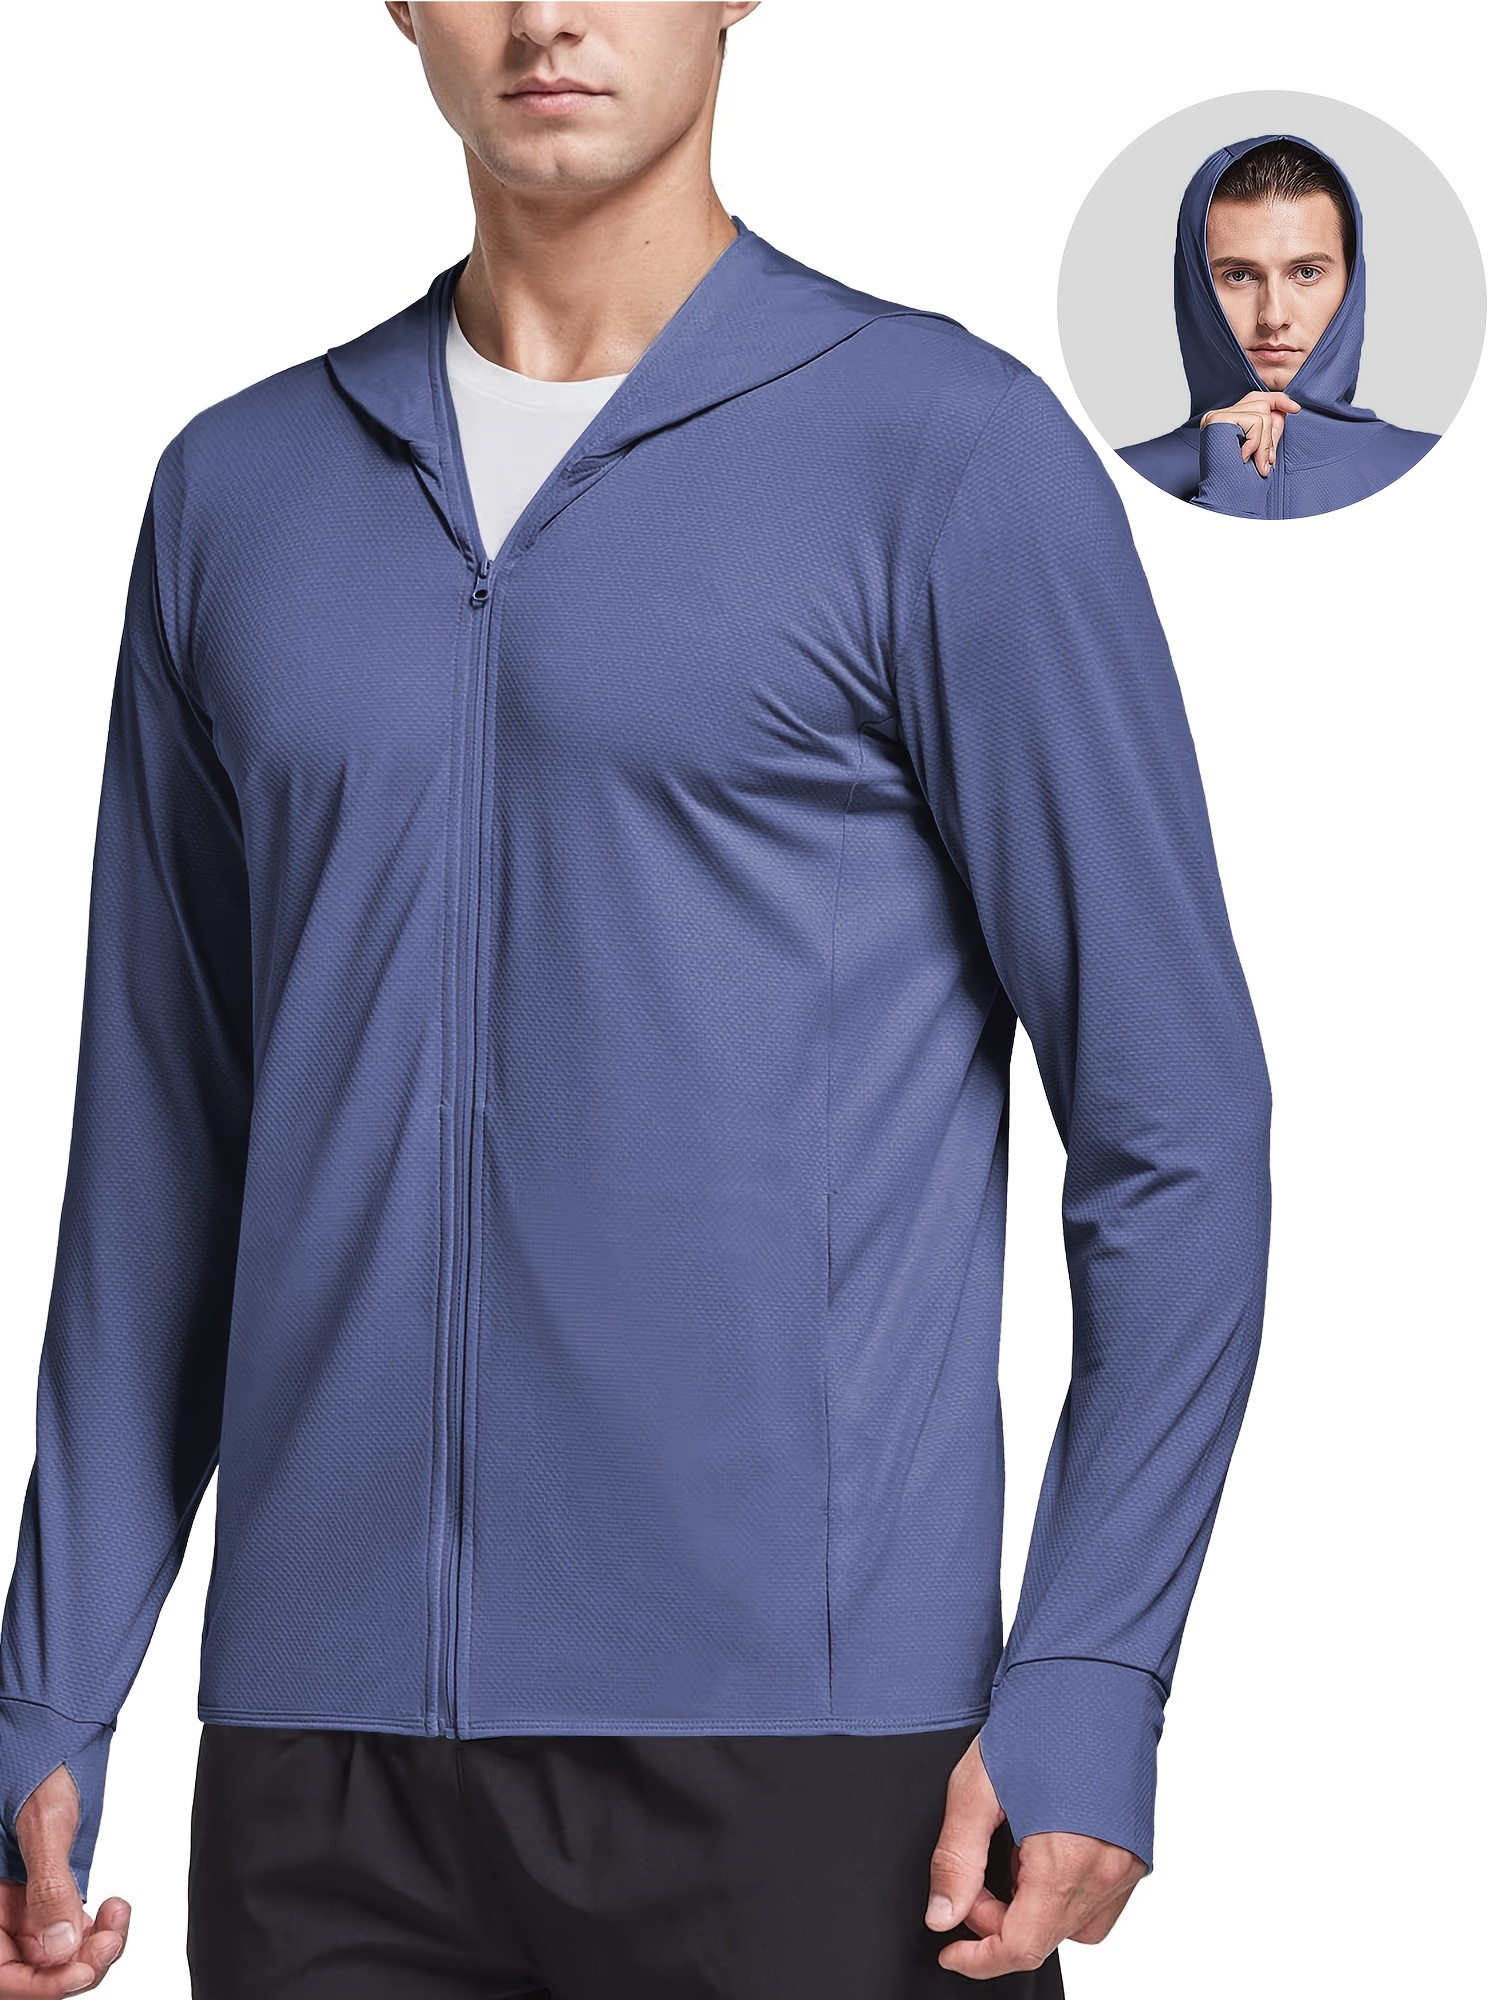 Men's Sun Protection Hooded Jacket - UPF 50+ UV Shirt With Long Sleeves,  Quick Dry Fabric For Fishing, Hiking, And Workouts